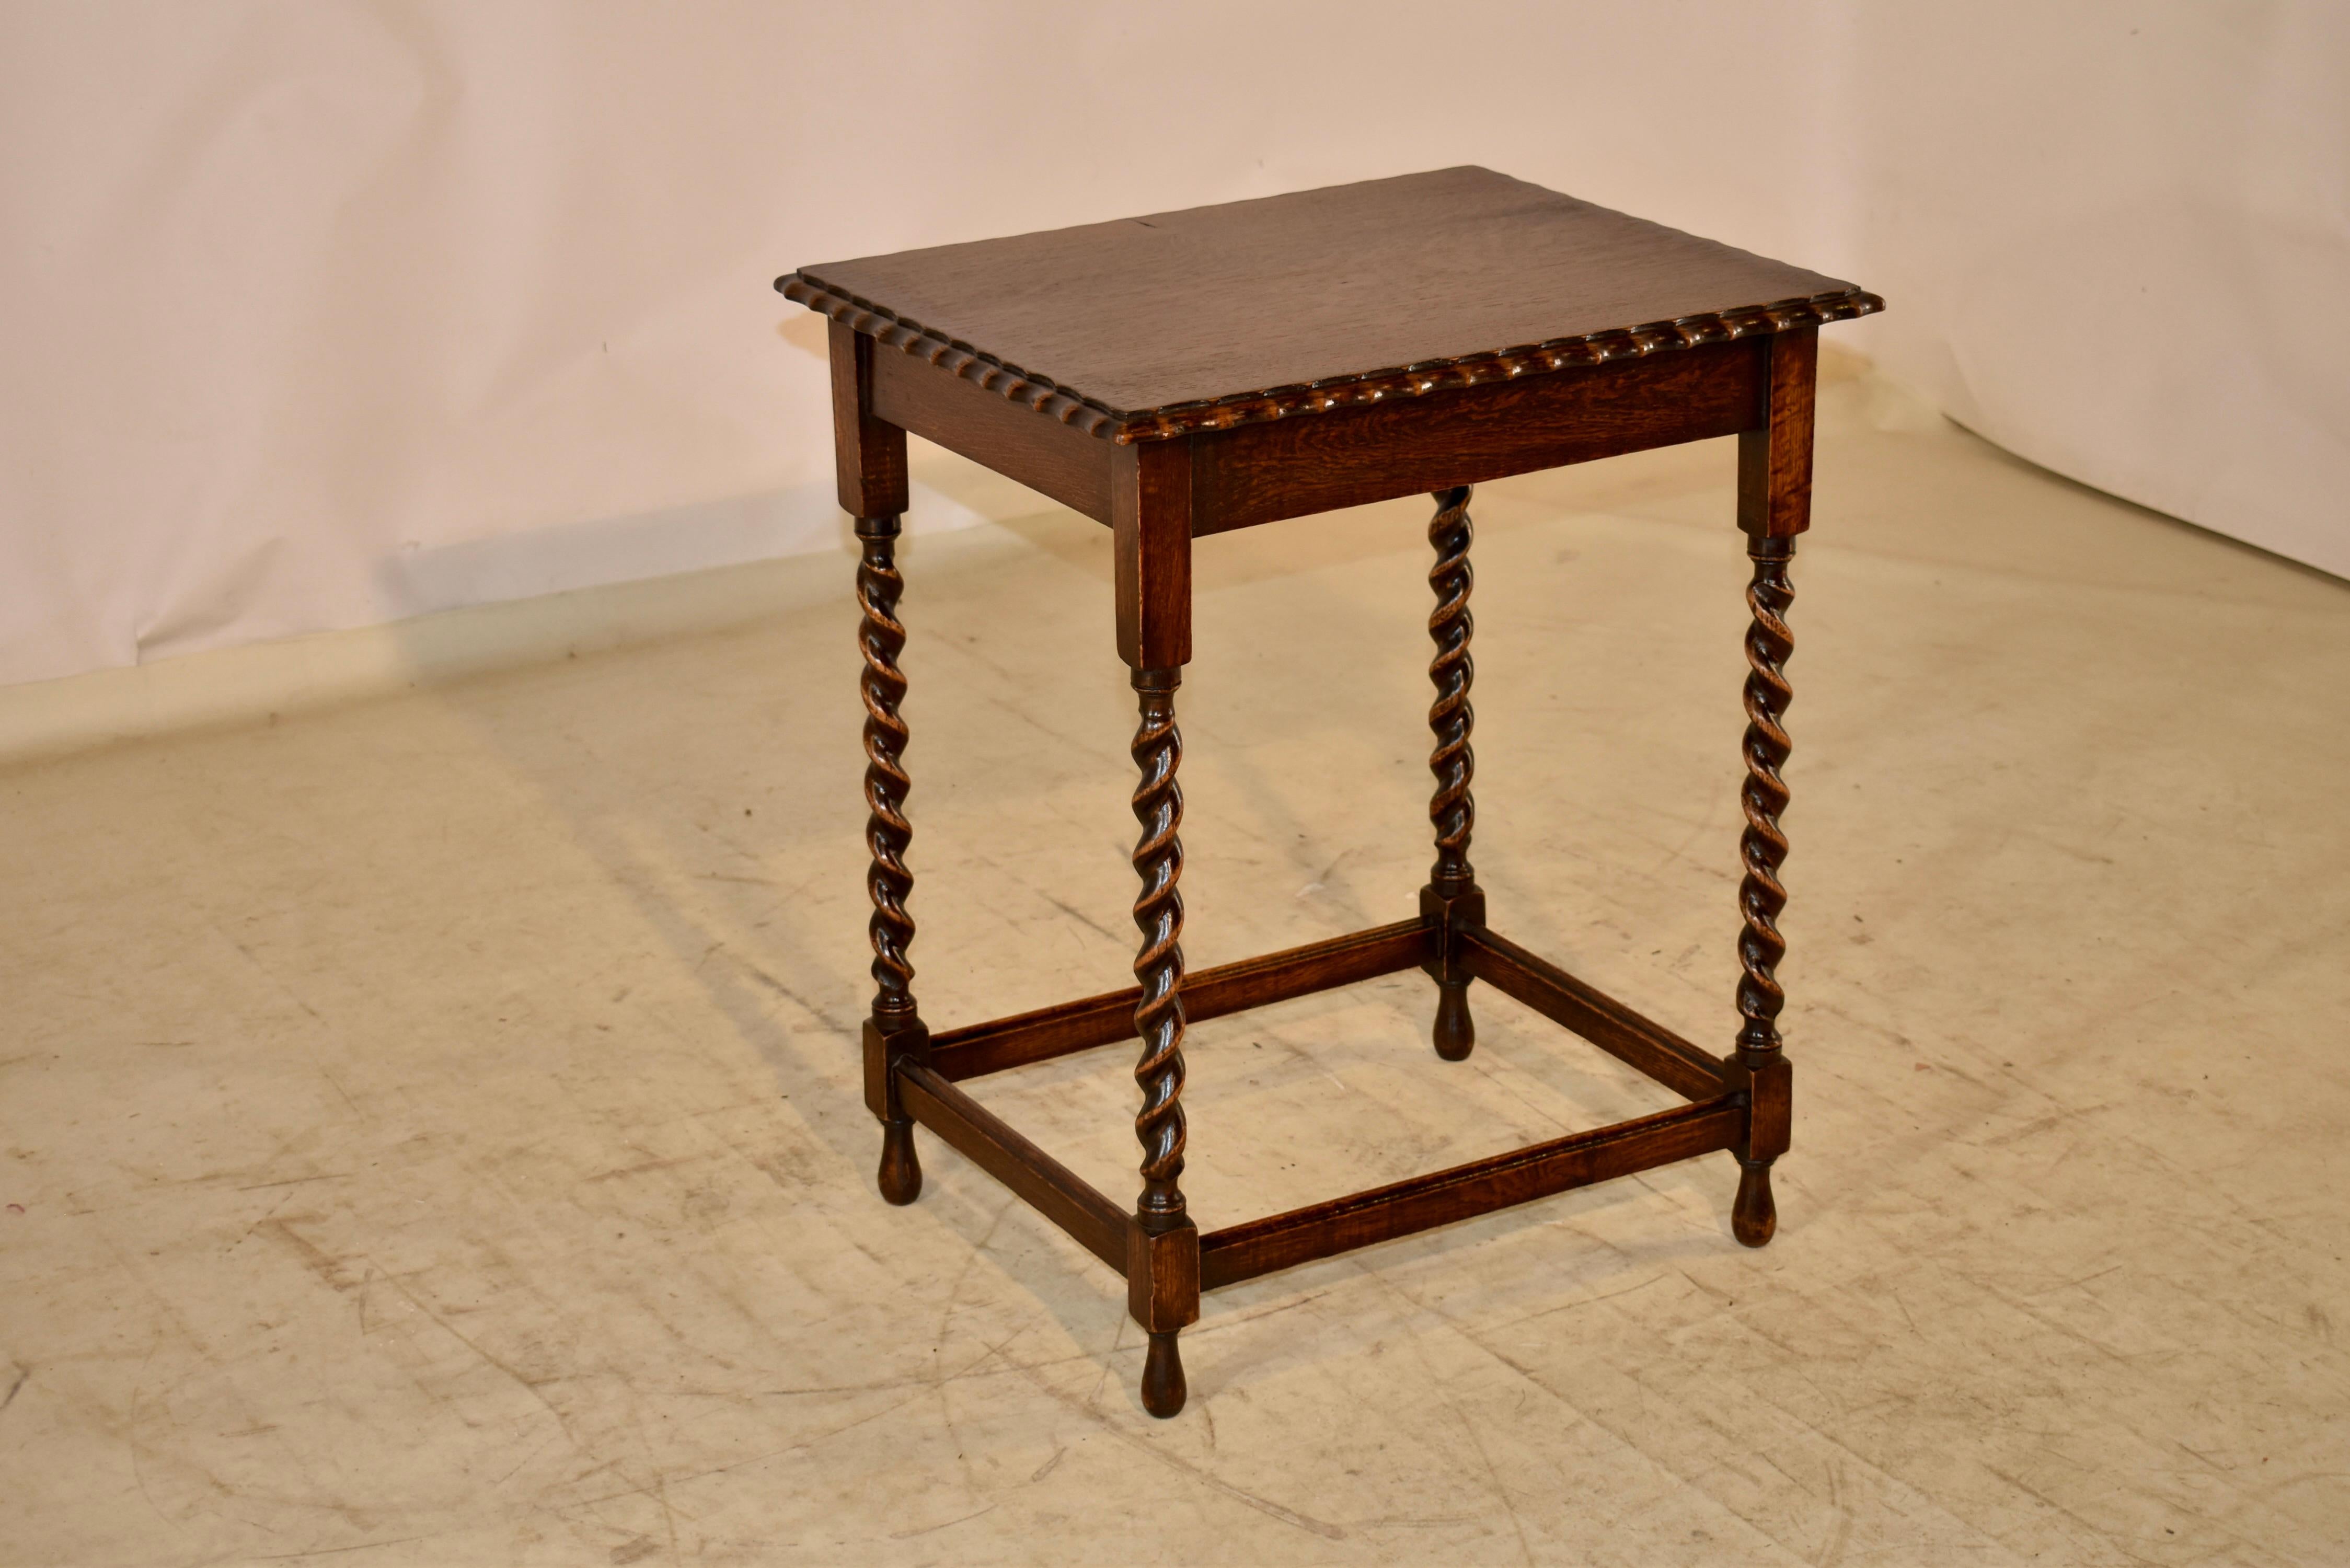 Circa 1900 oak side table from England. The top is nicely grained and has a beveled and scalloped edge, following down to a simple apron. The table is raised on hand turned barley twist legs, joined by simple stretchers and supported on hand turned